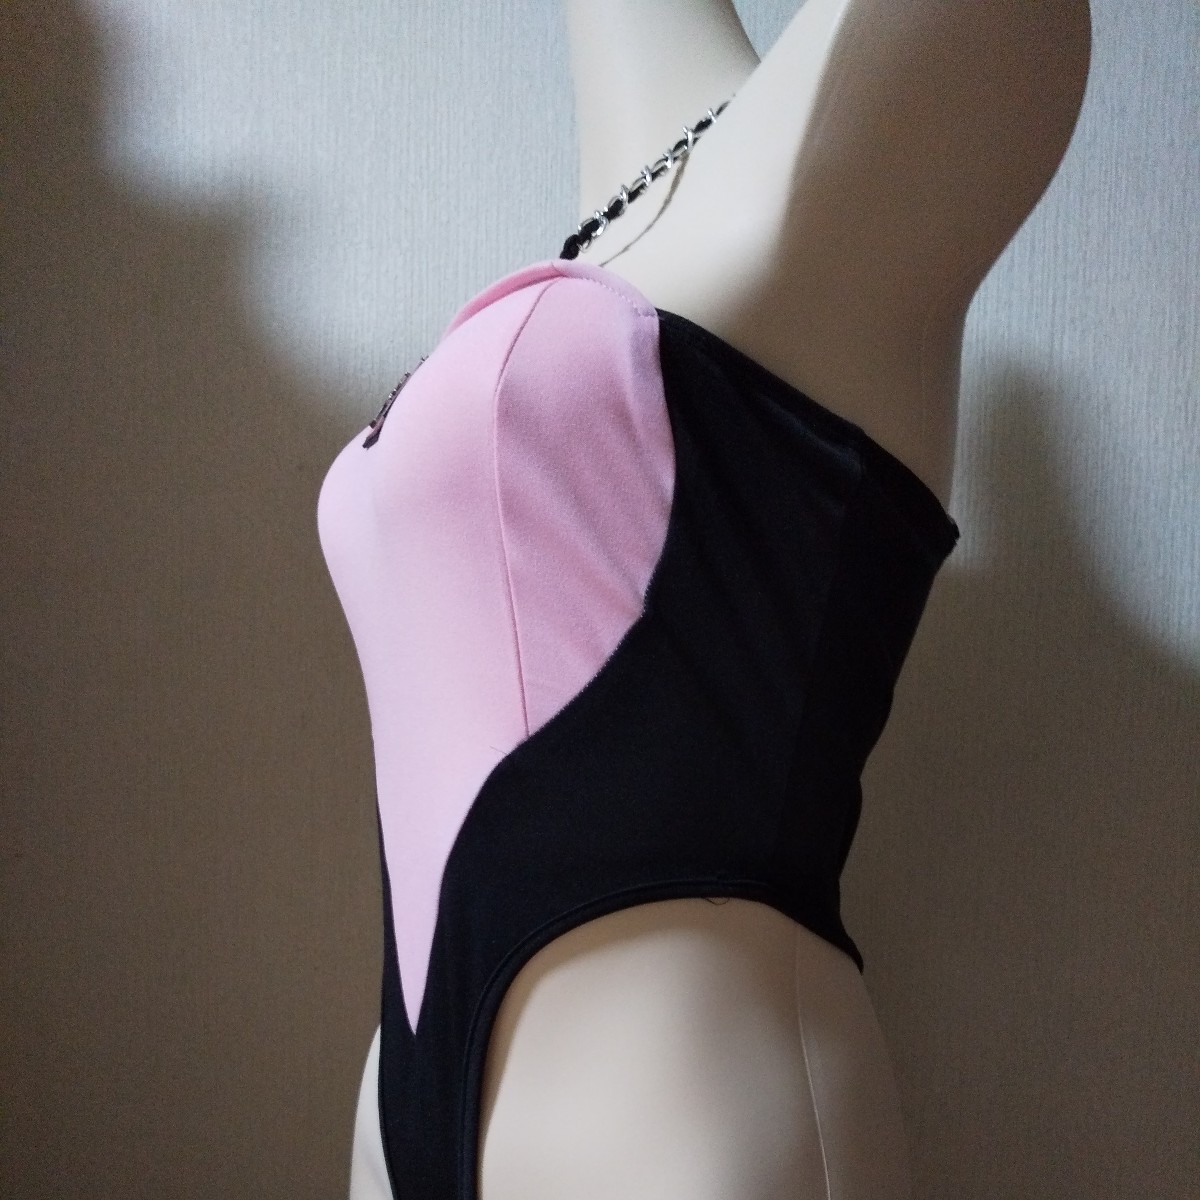  body suit S inscription real quality S-M size Heart pink T-back high leg 